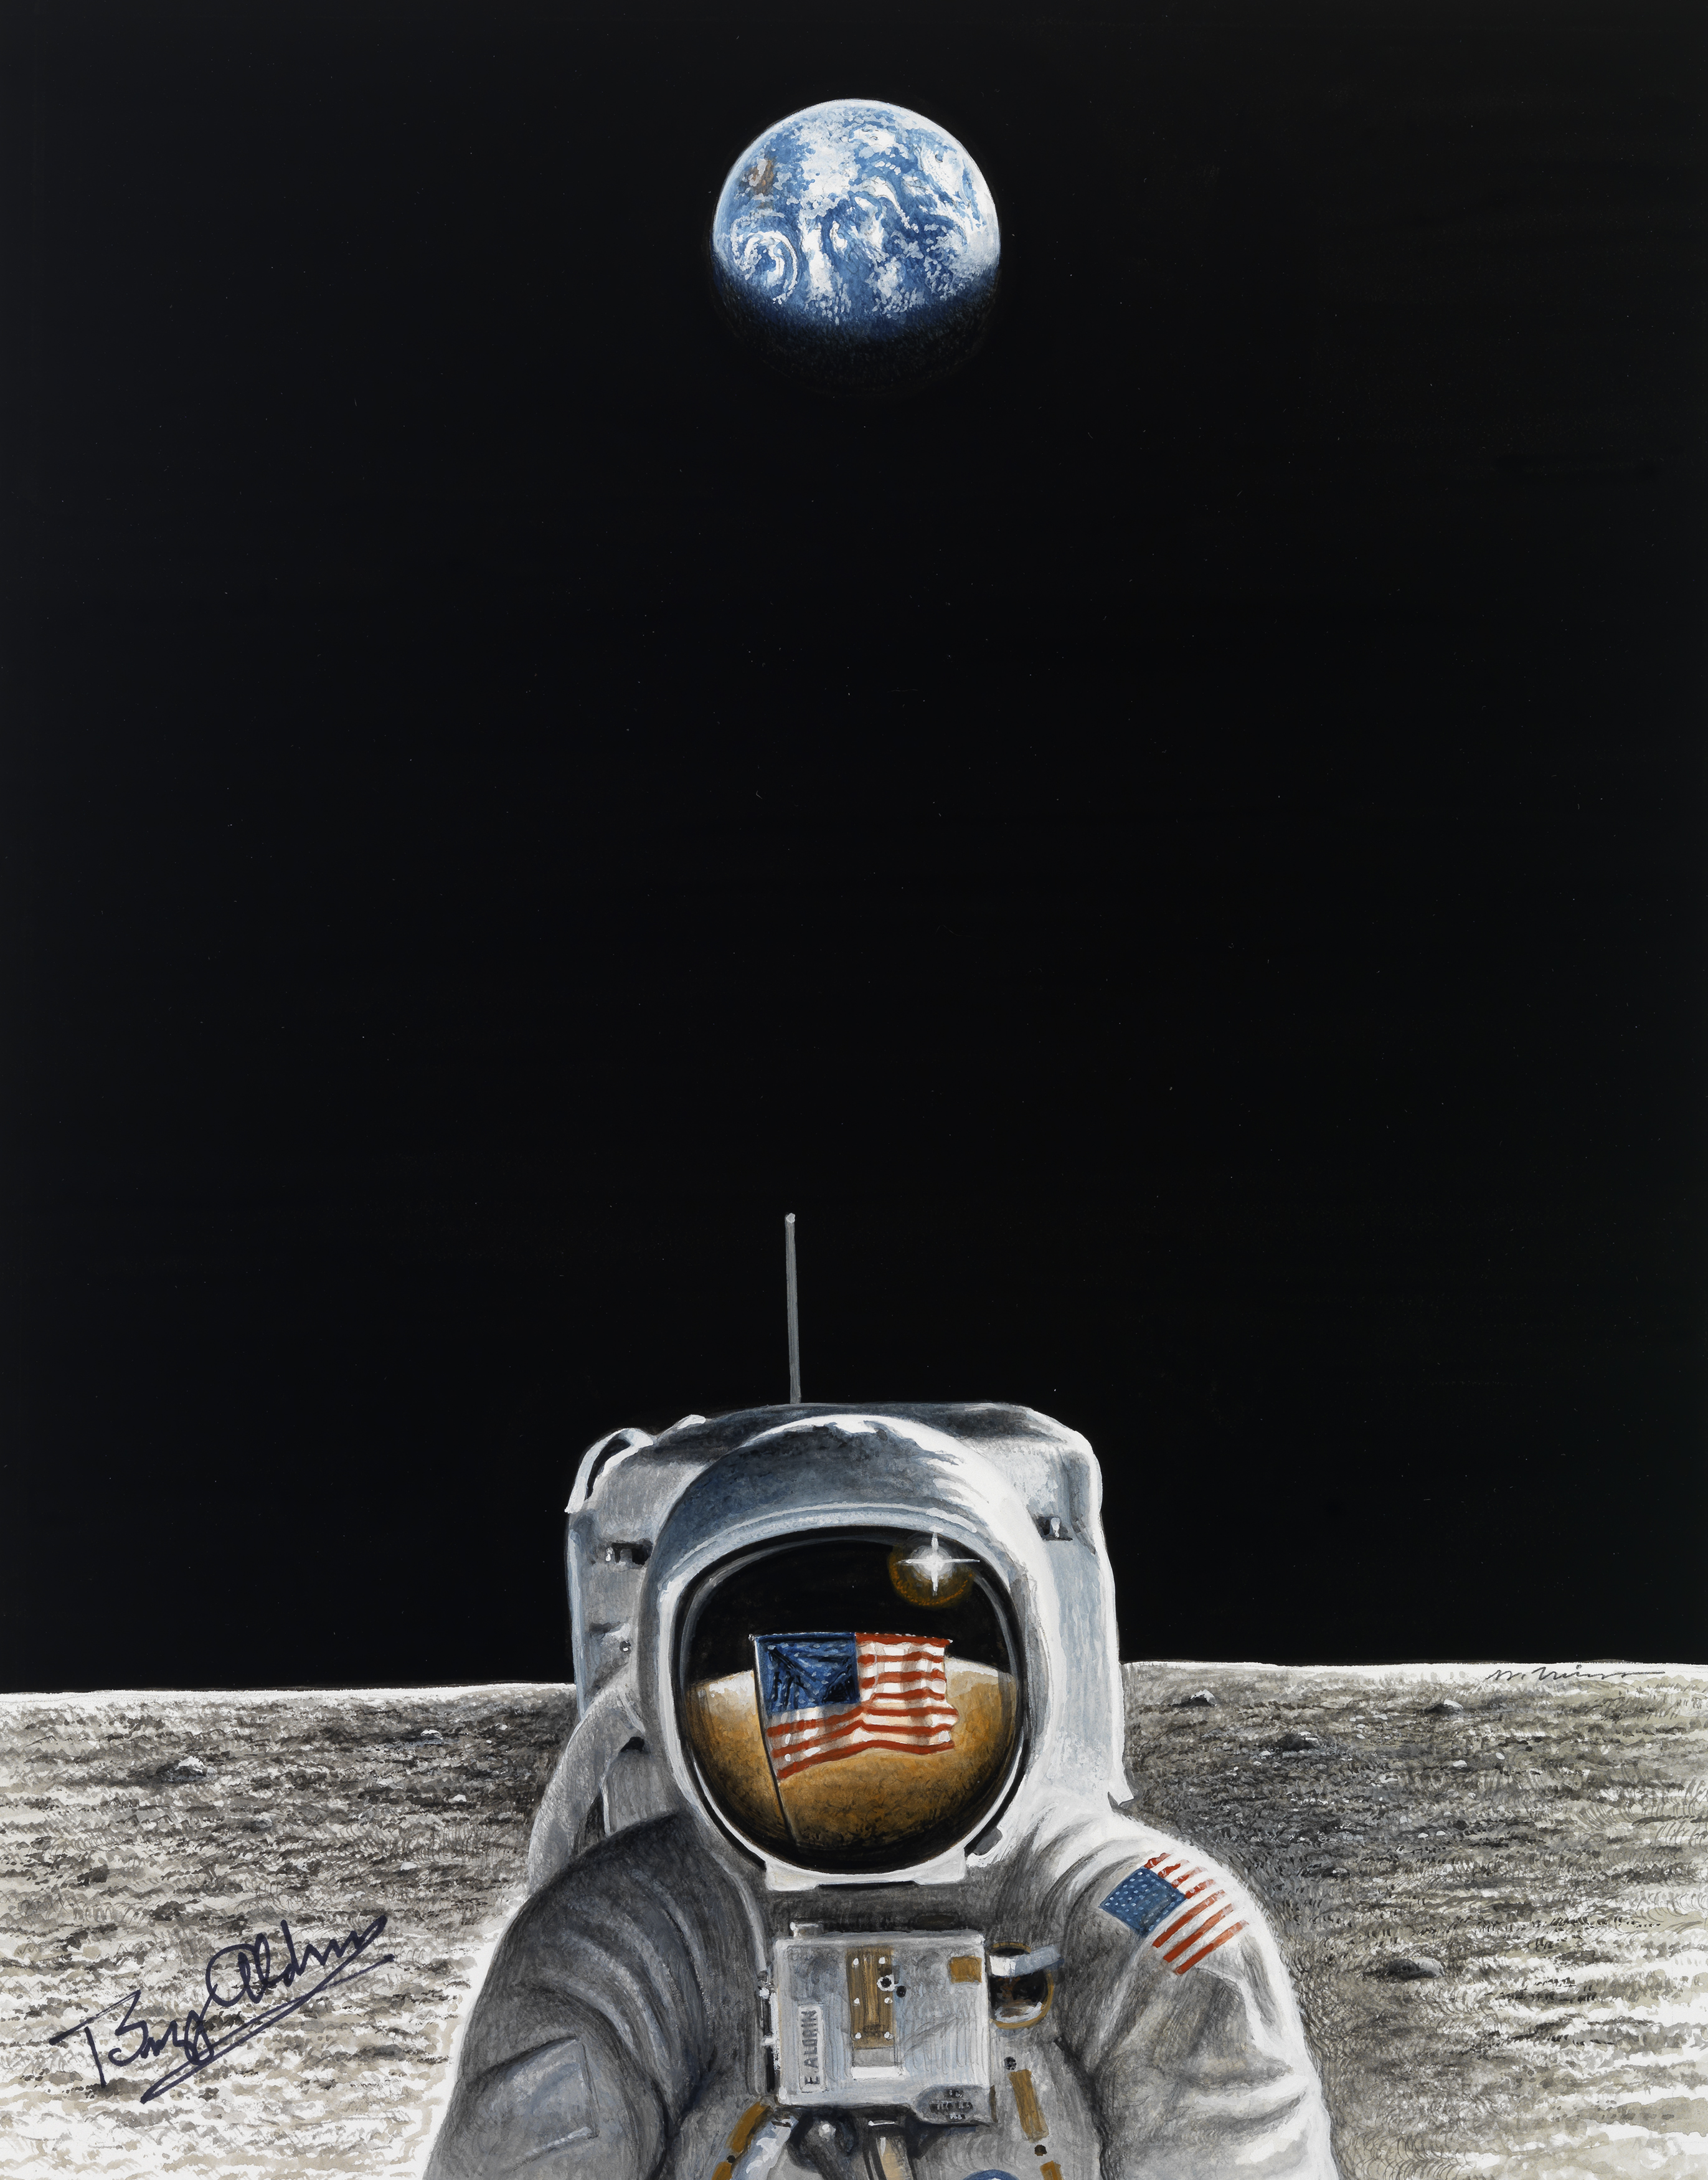 An astronaut stands on the moon with the American flag reflected in the astronaut's helmet. Earth is in the background.